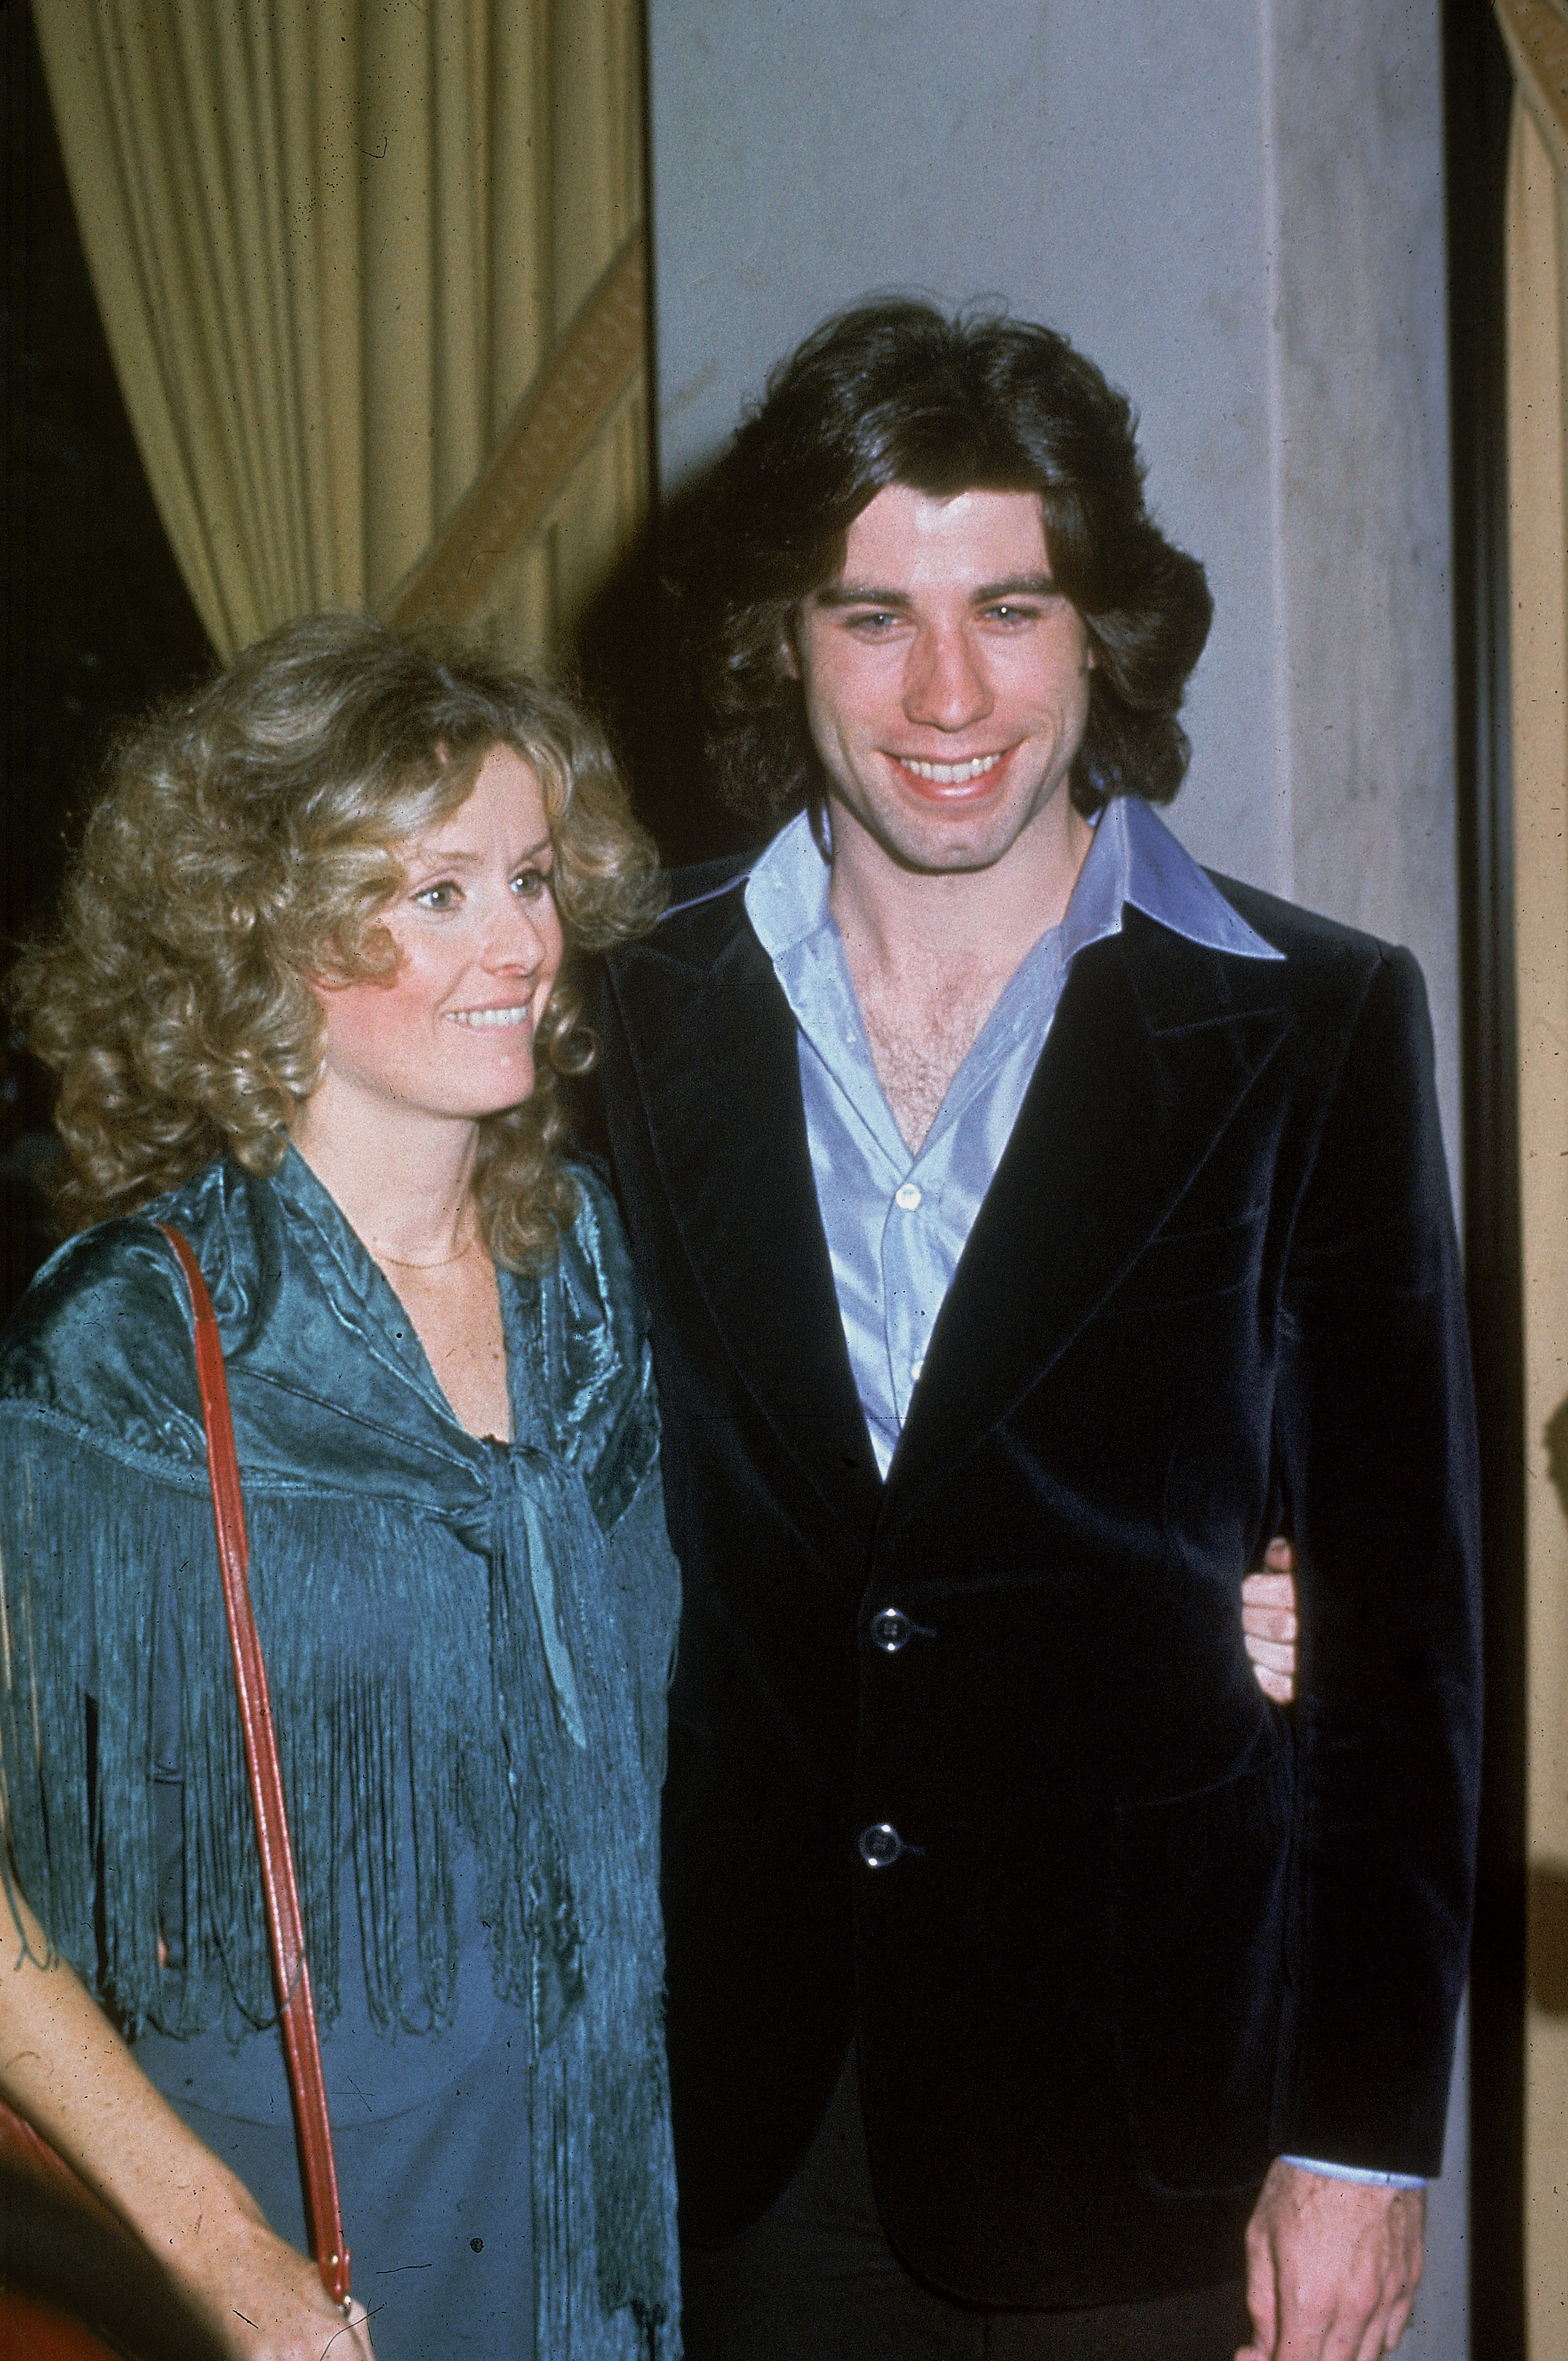 John Travolta and Diana Hyland sighting in Los Angeles on December 8, 1976 | Source: Getty Images